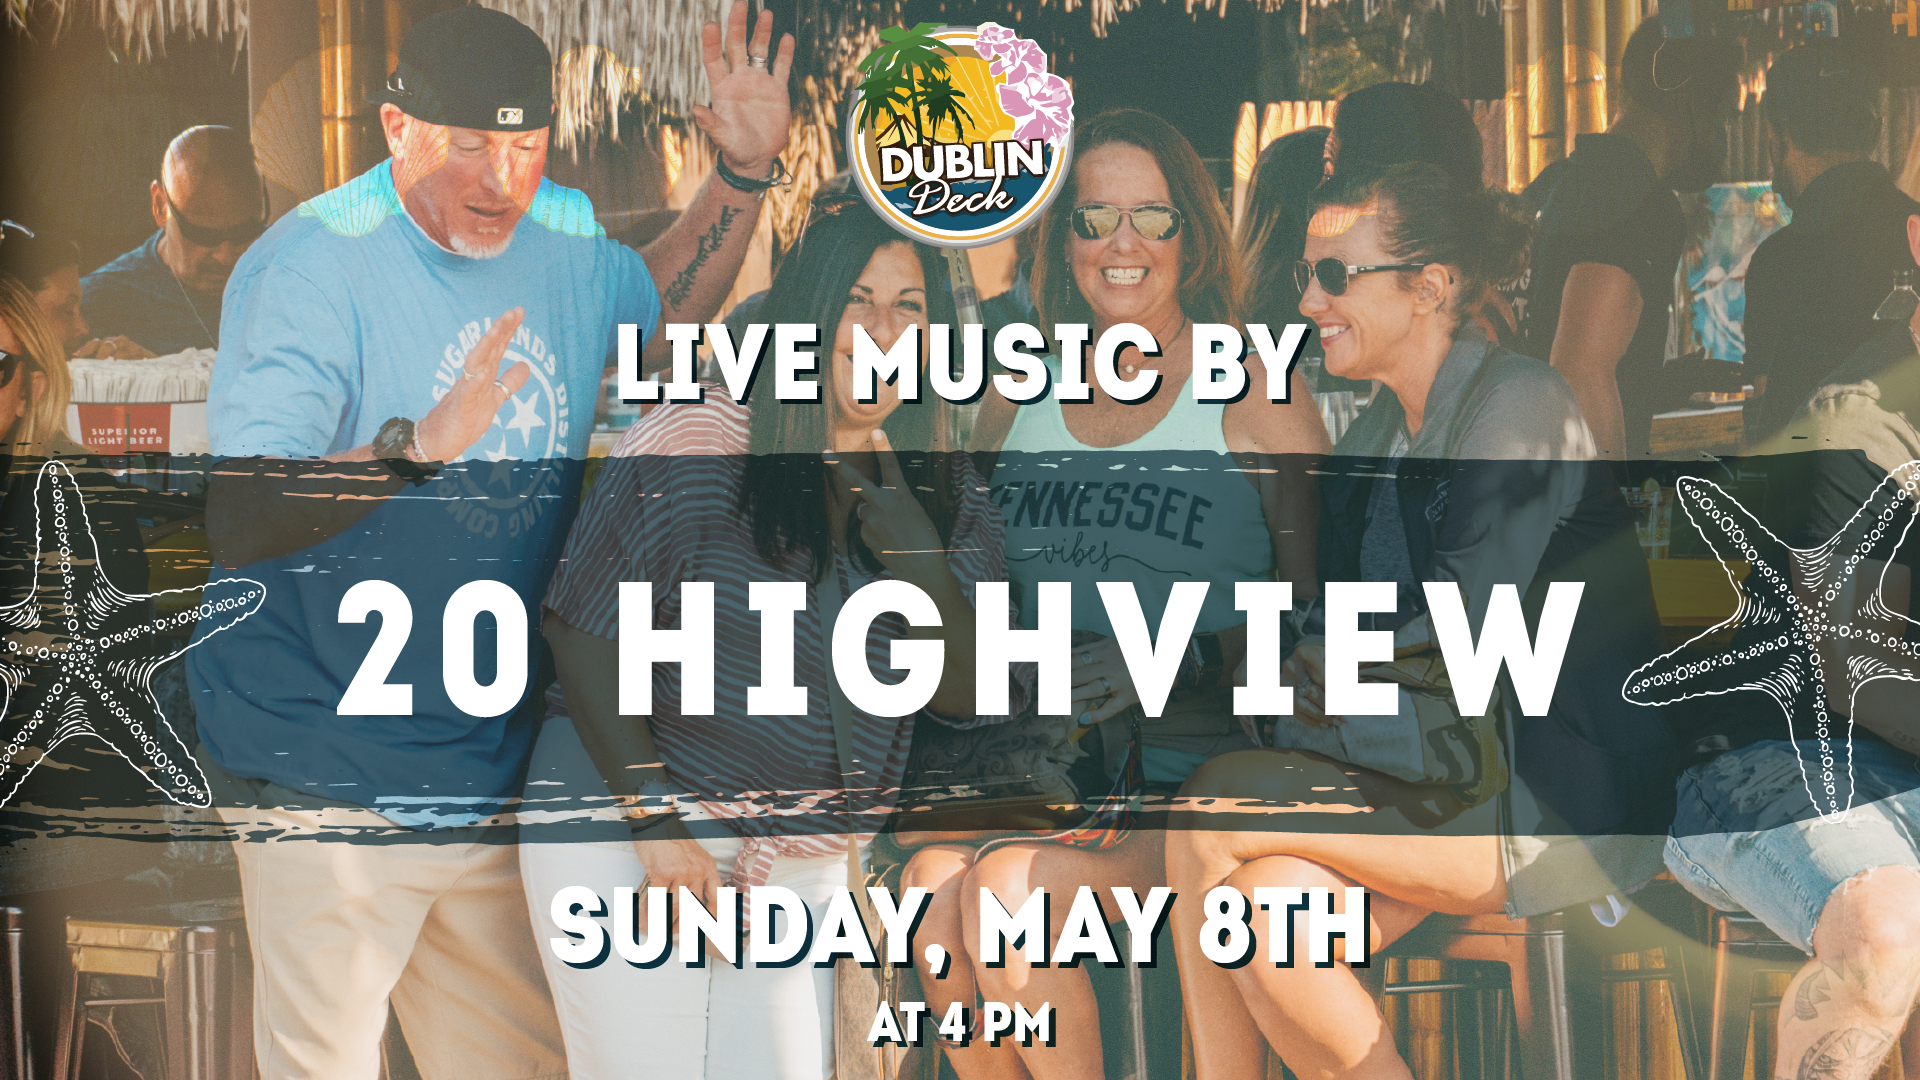 End the weekend off with the sounds of 20 Highview on the Patchogue Riverfront! Music begins at 4PM